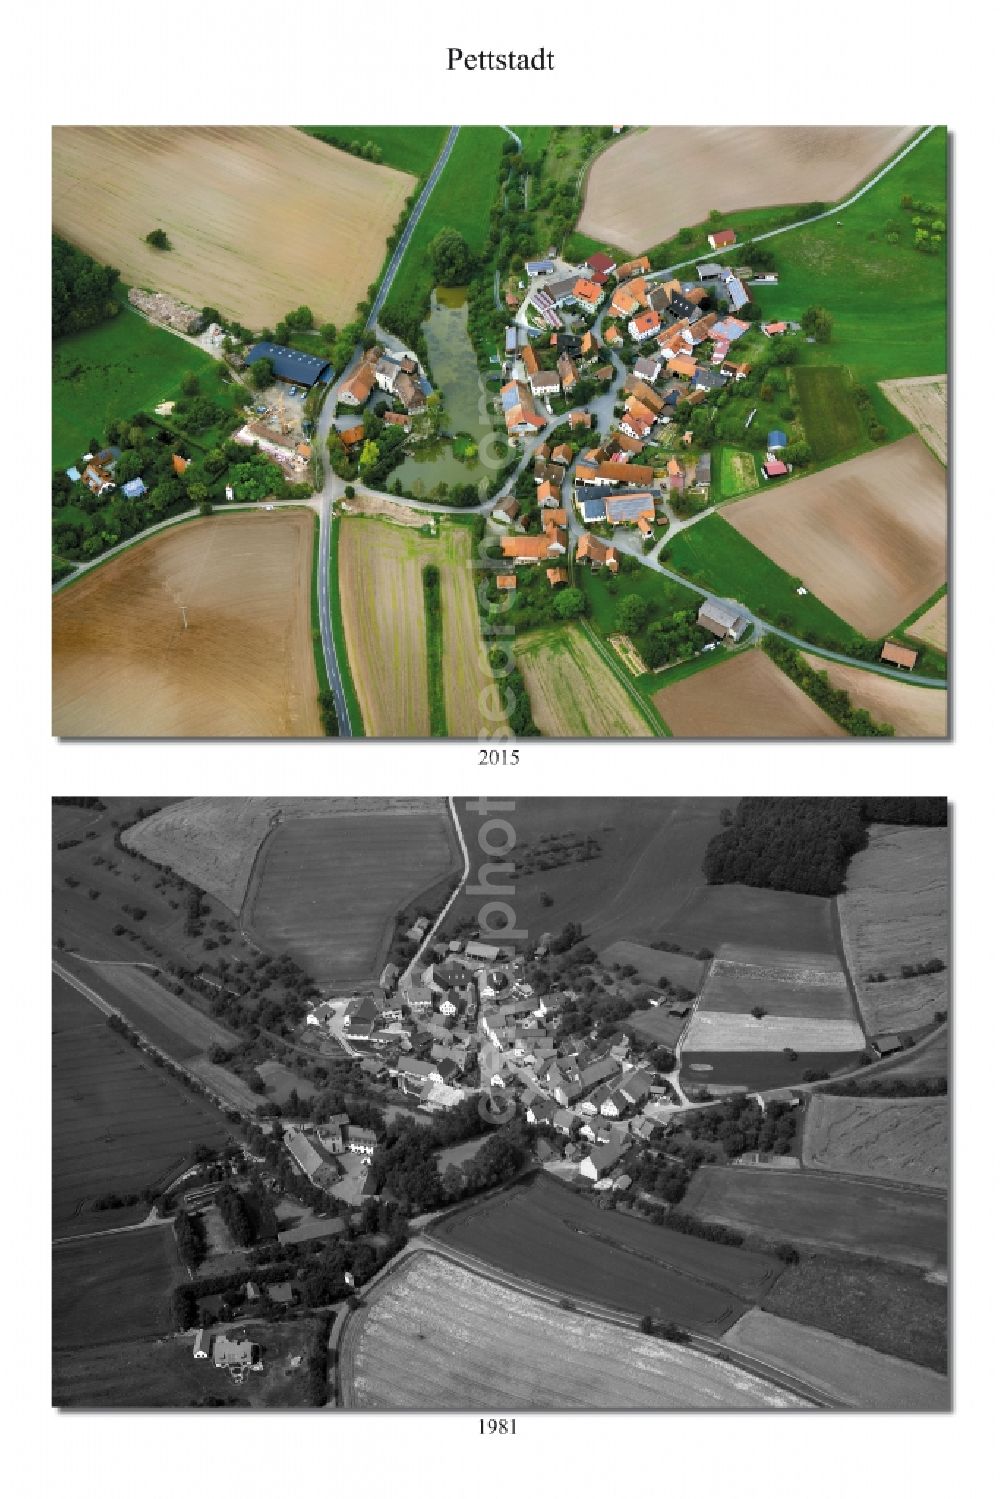 Kirchlauter from the bird's eye view: 1981 and 2015 village - view change of Pettstadt in the state Bavaria